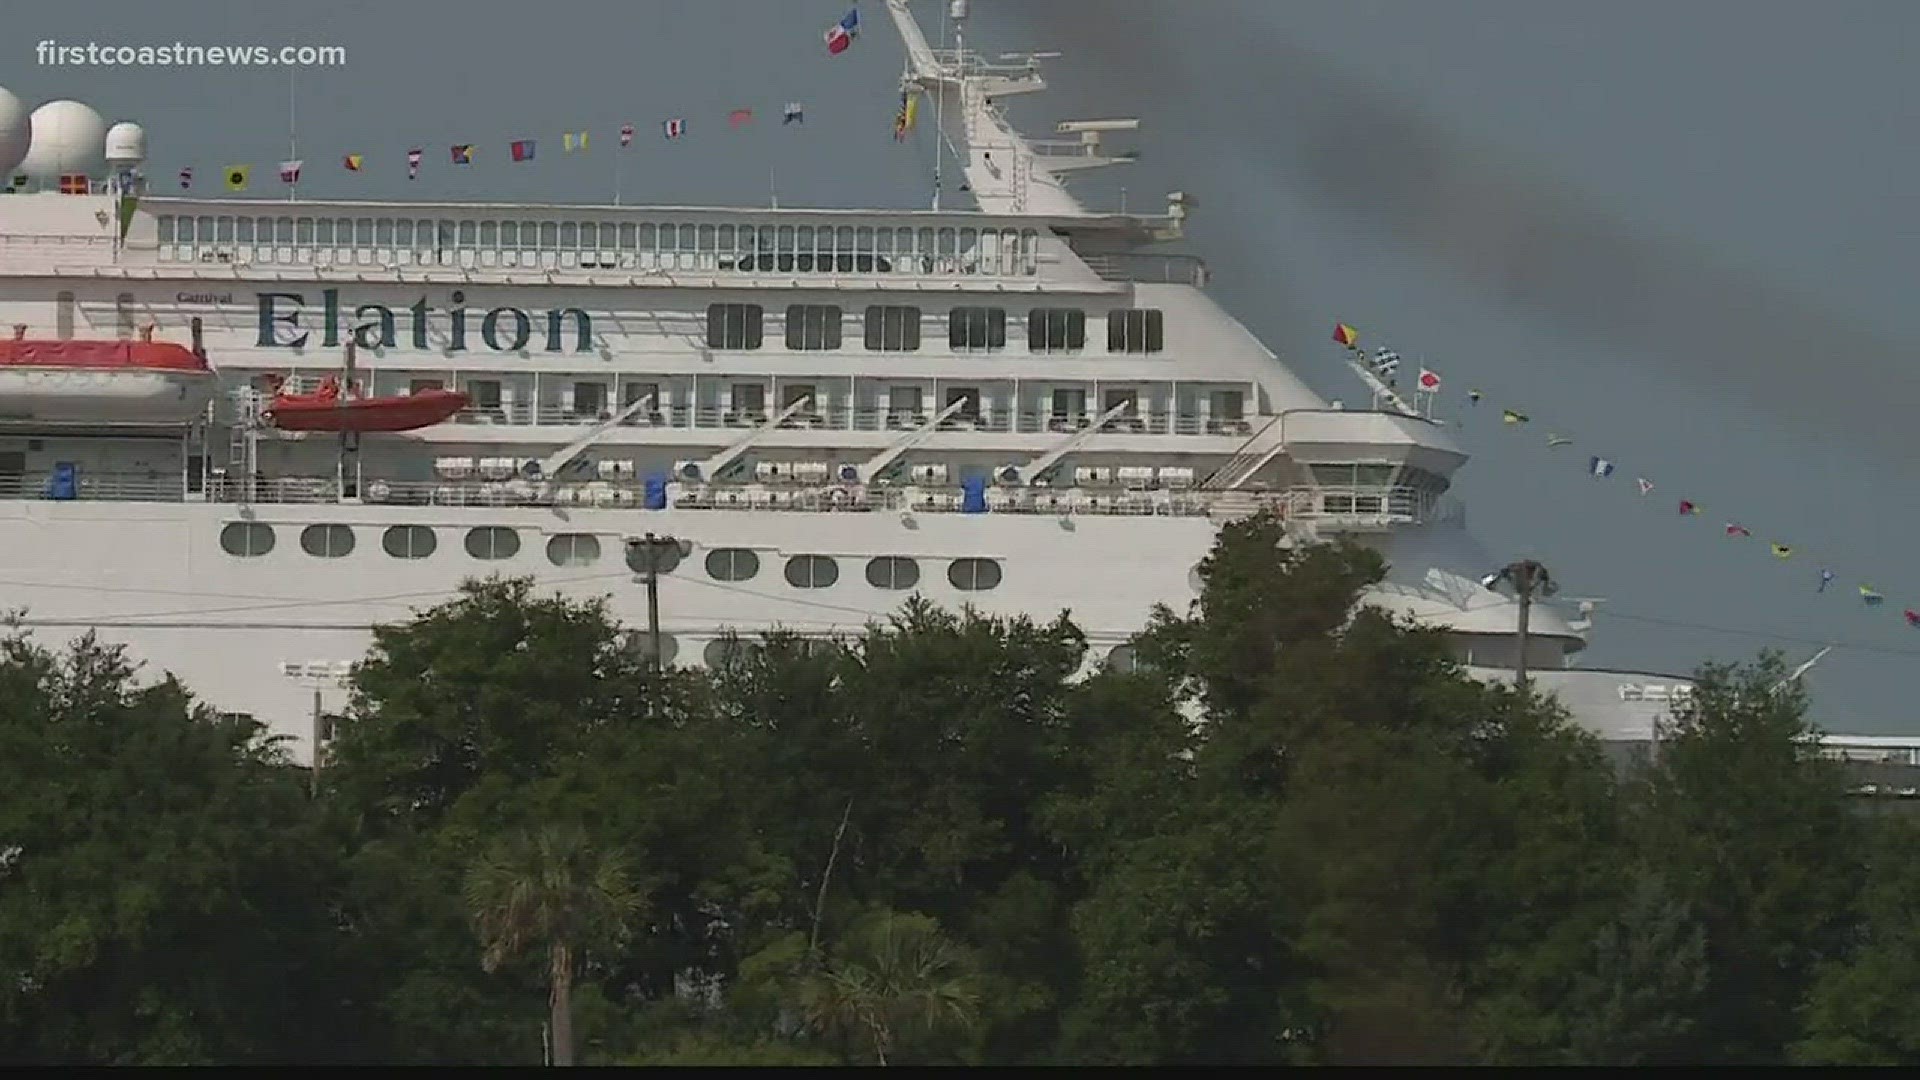 A woman died after falling from her balcony on a cruise ship on the way to the Bahamas.